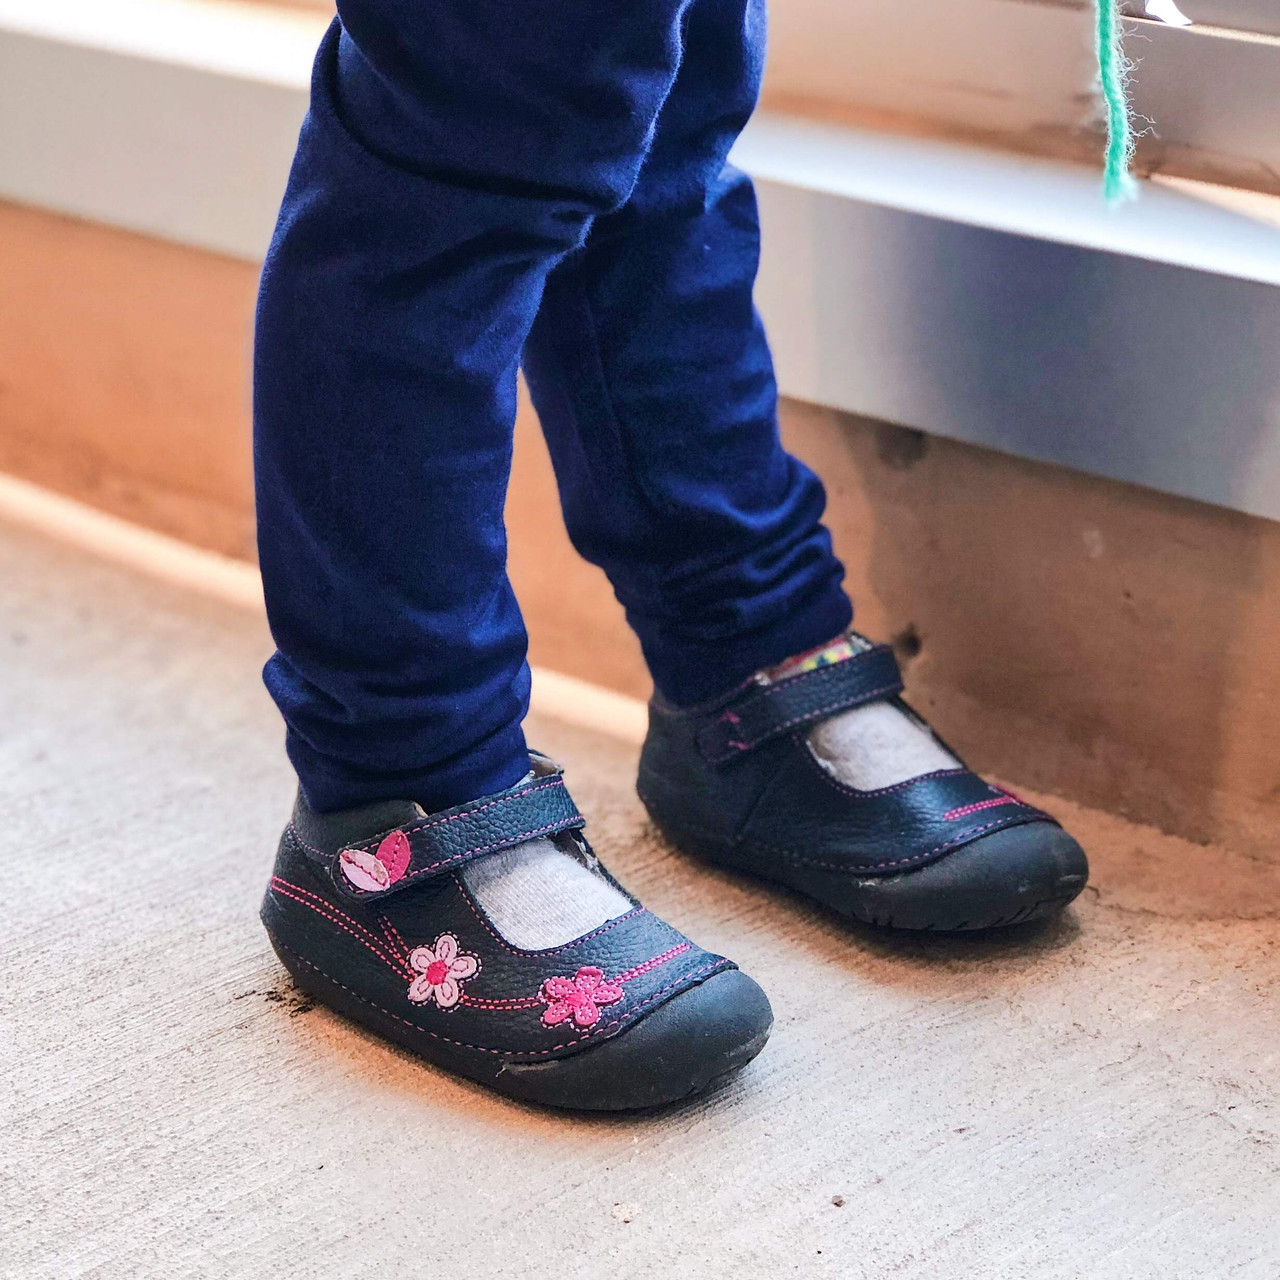 arch support shoes for toddlers